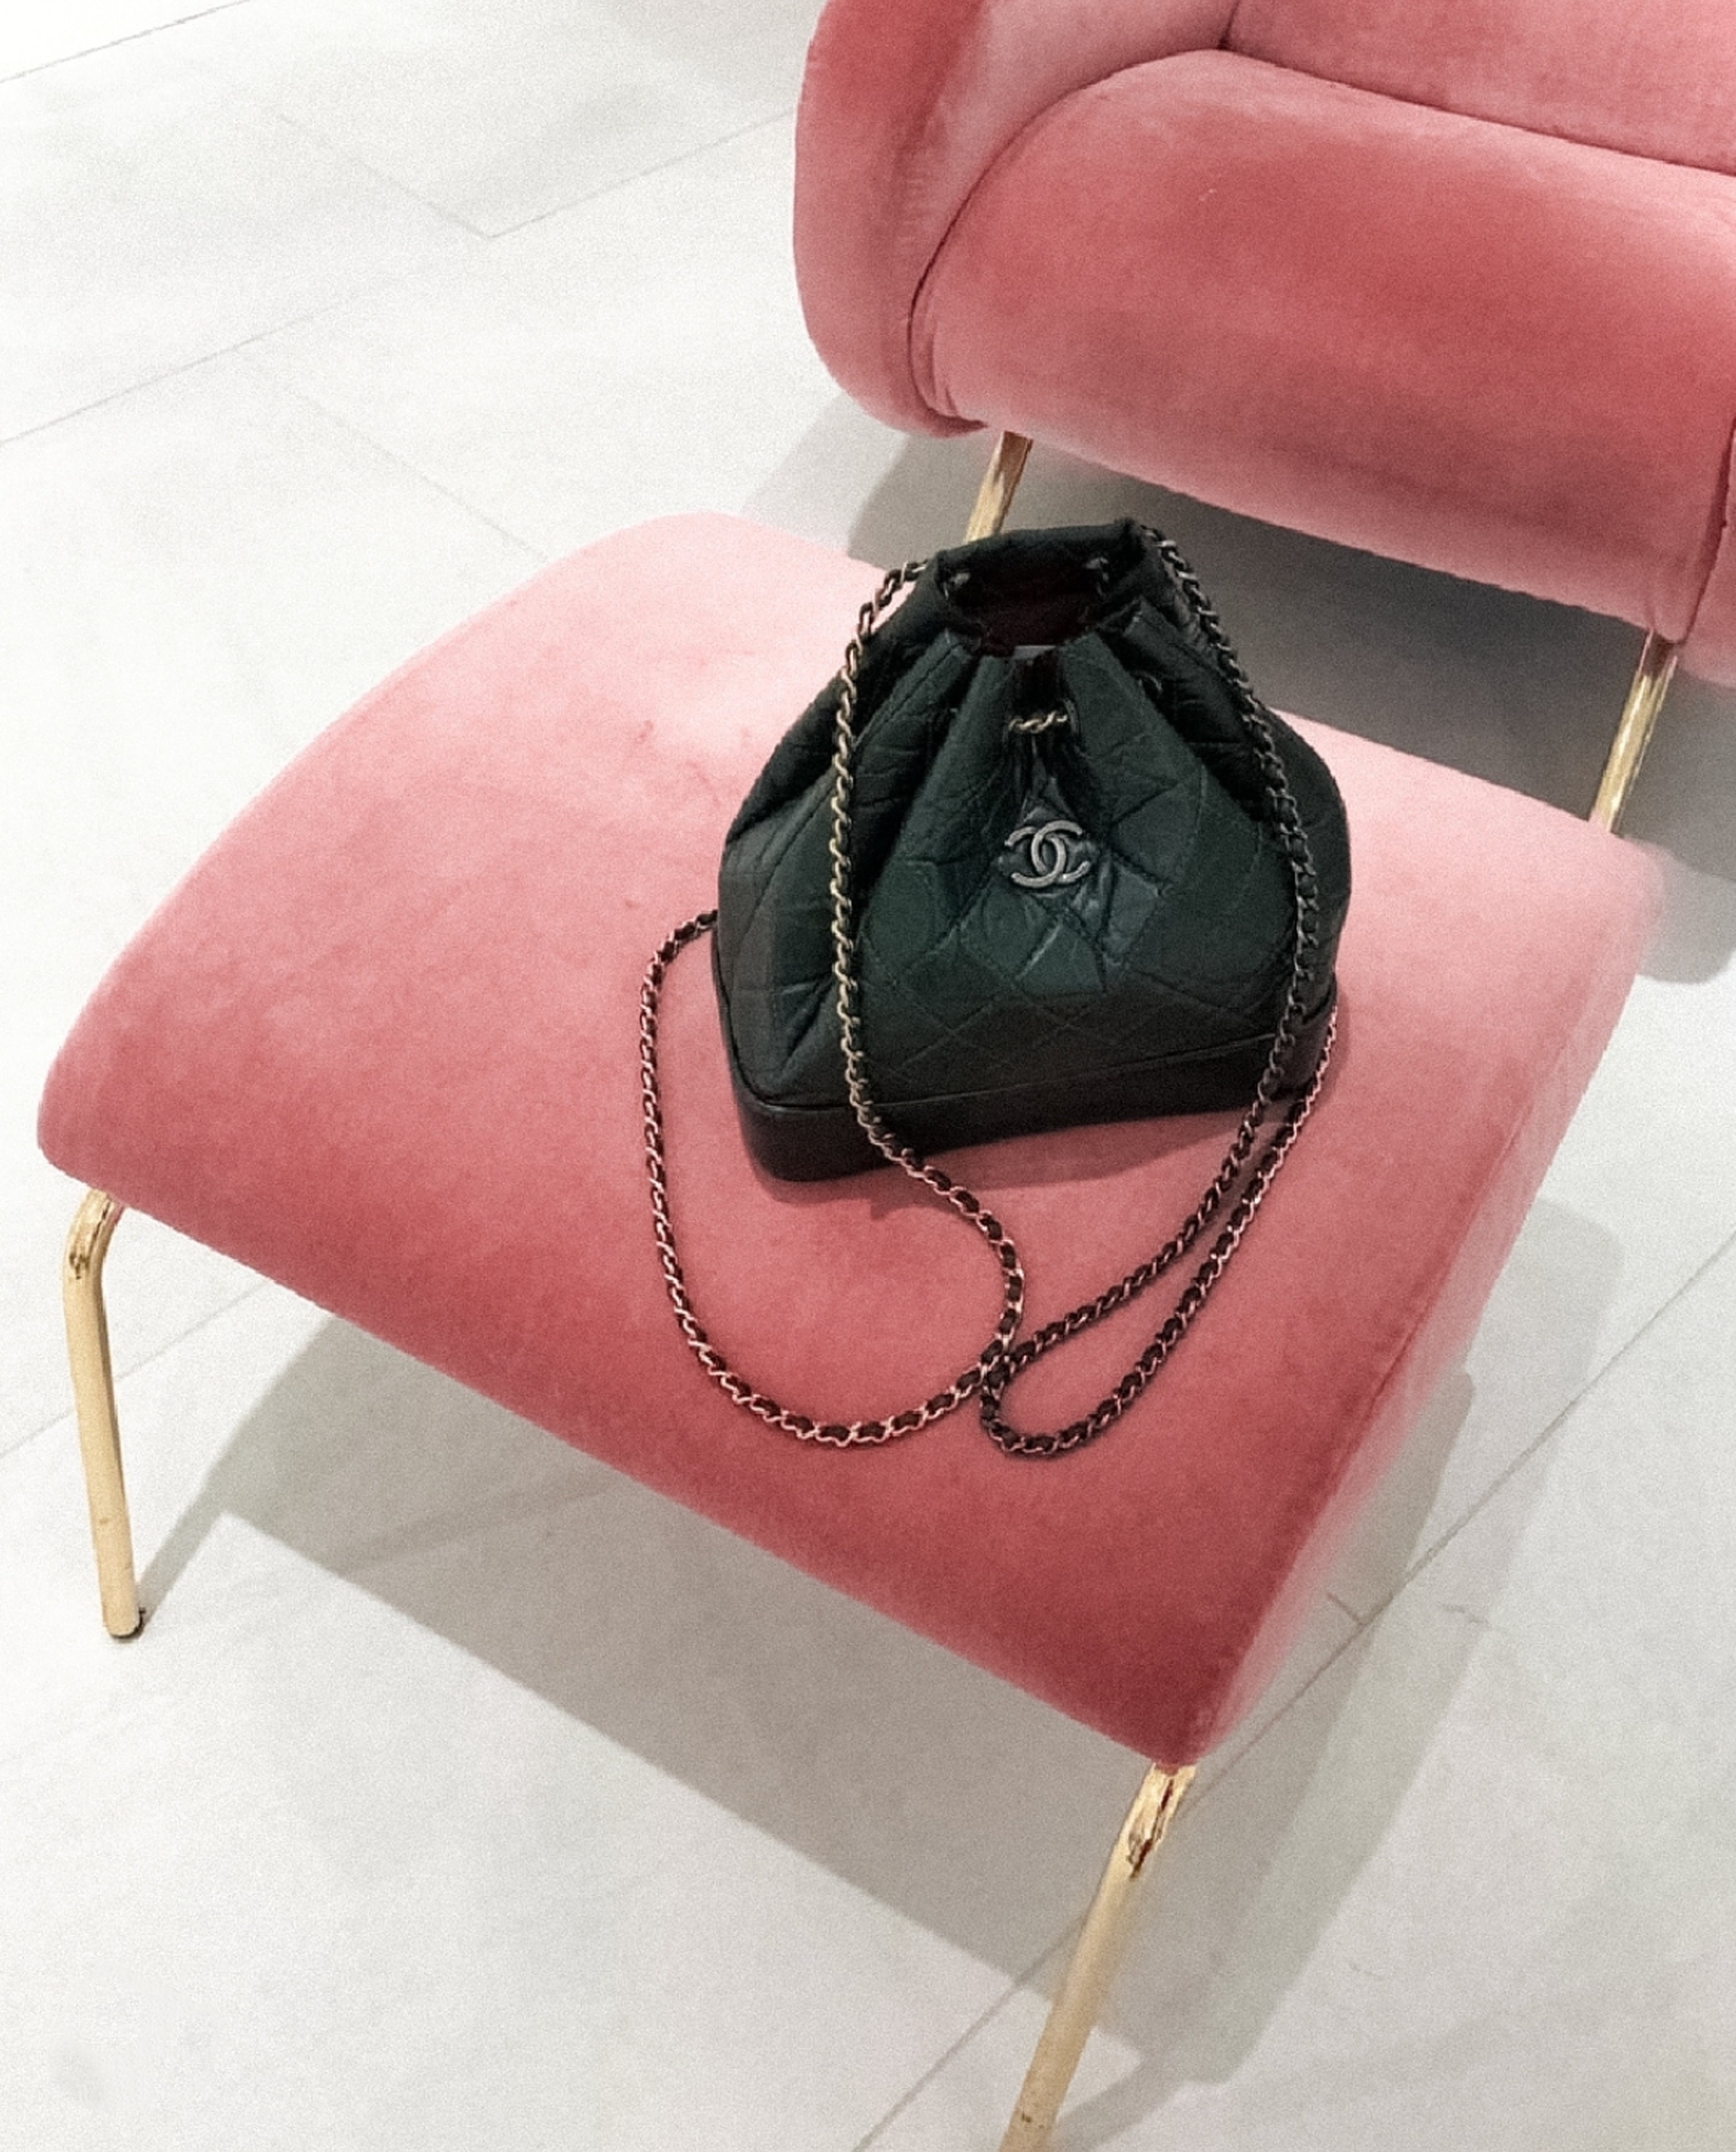 Quick Tips to Authenticate the Chanel Gabrielle Hobo Bag - Academy